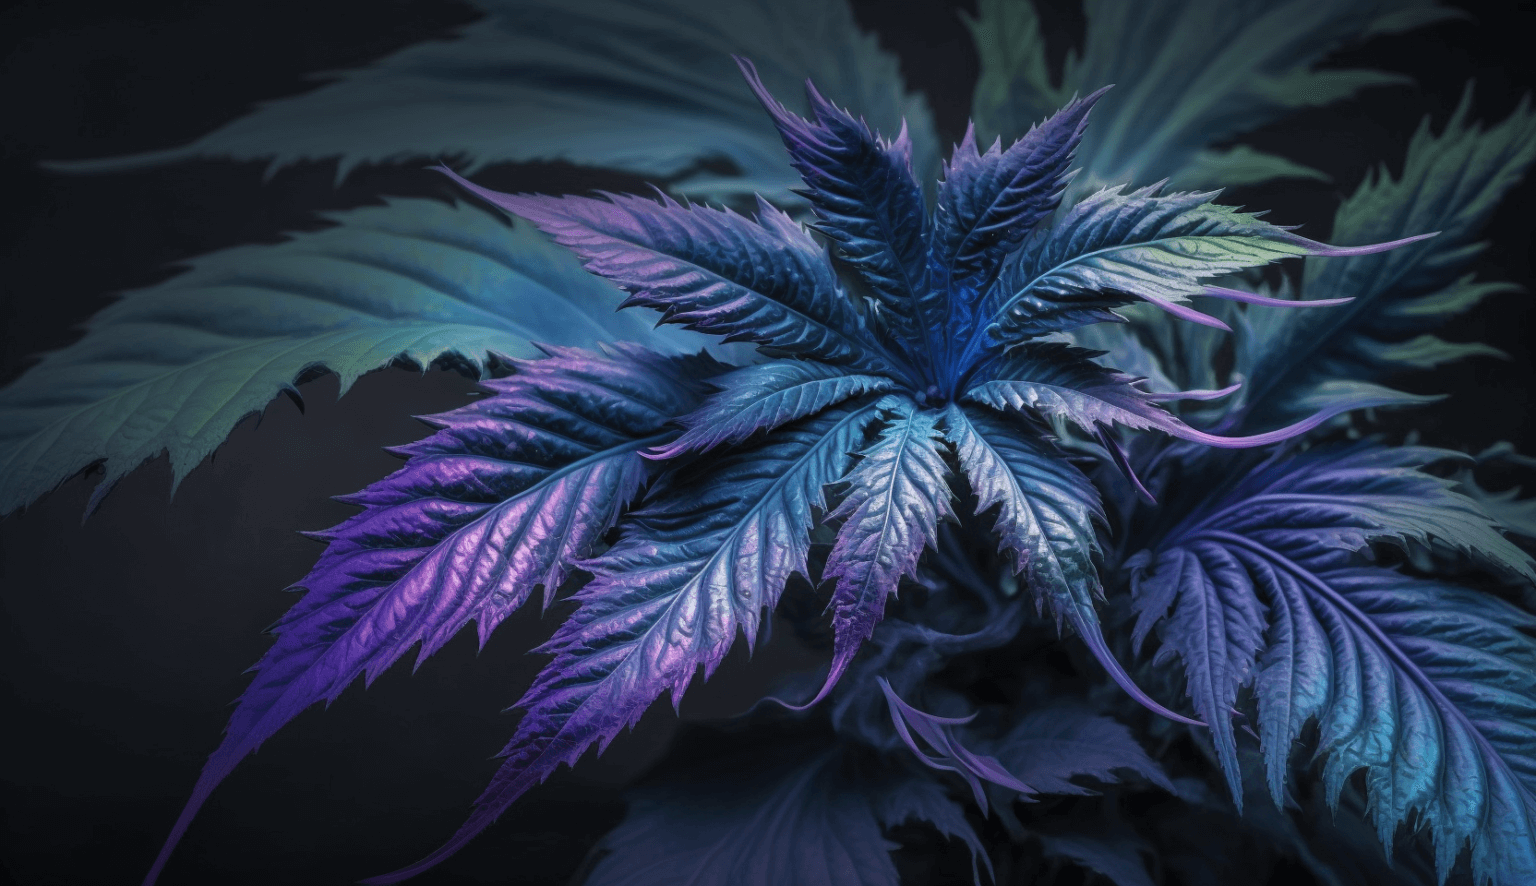 Blue violet cannabis leaves on a contrasting background